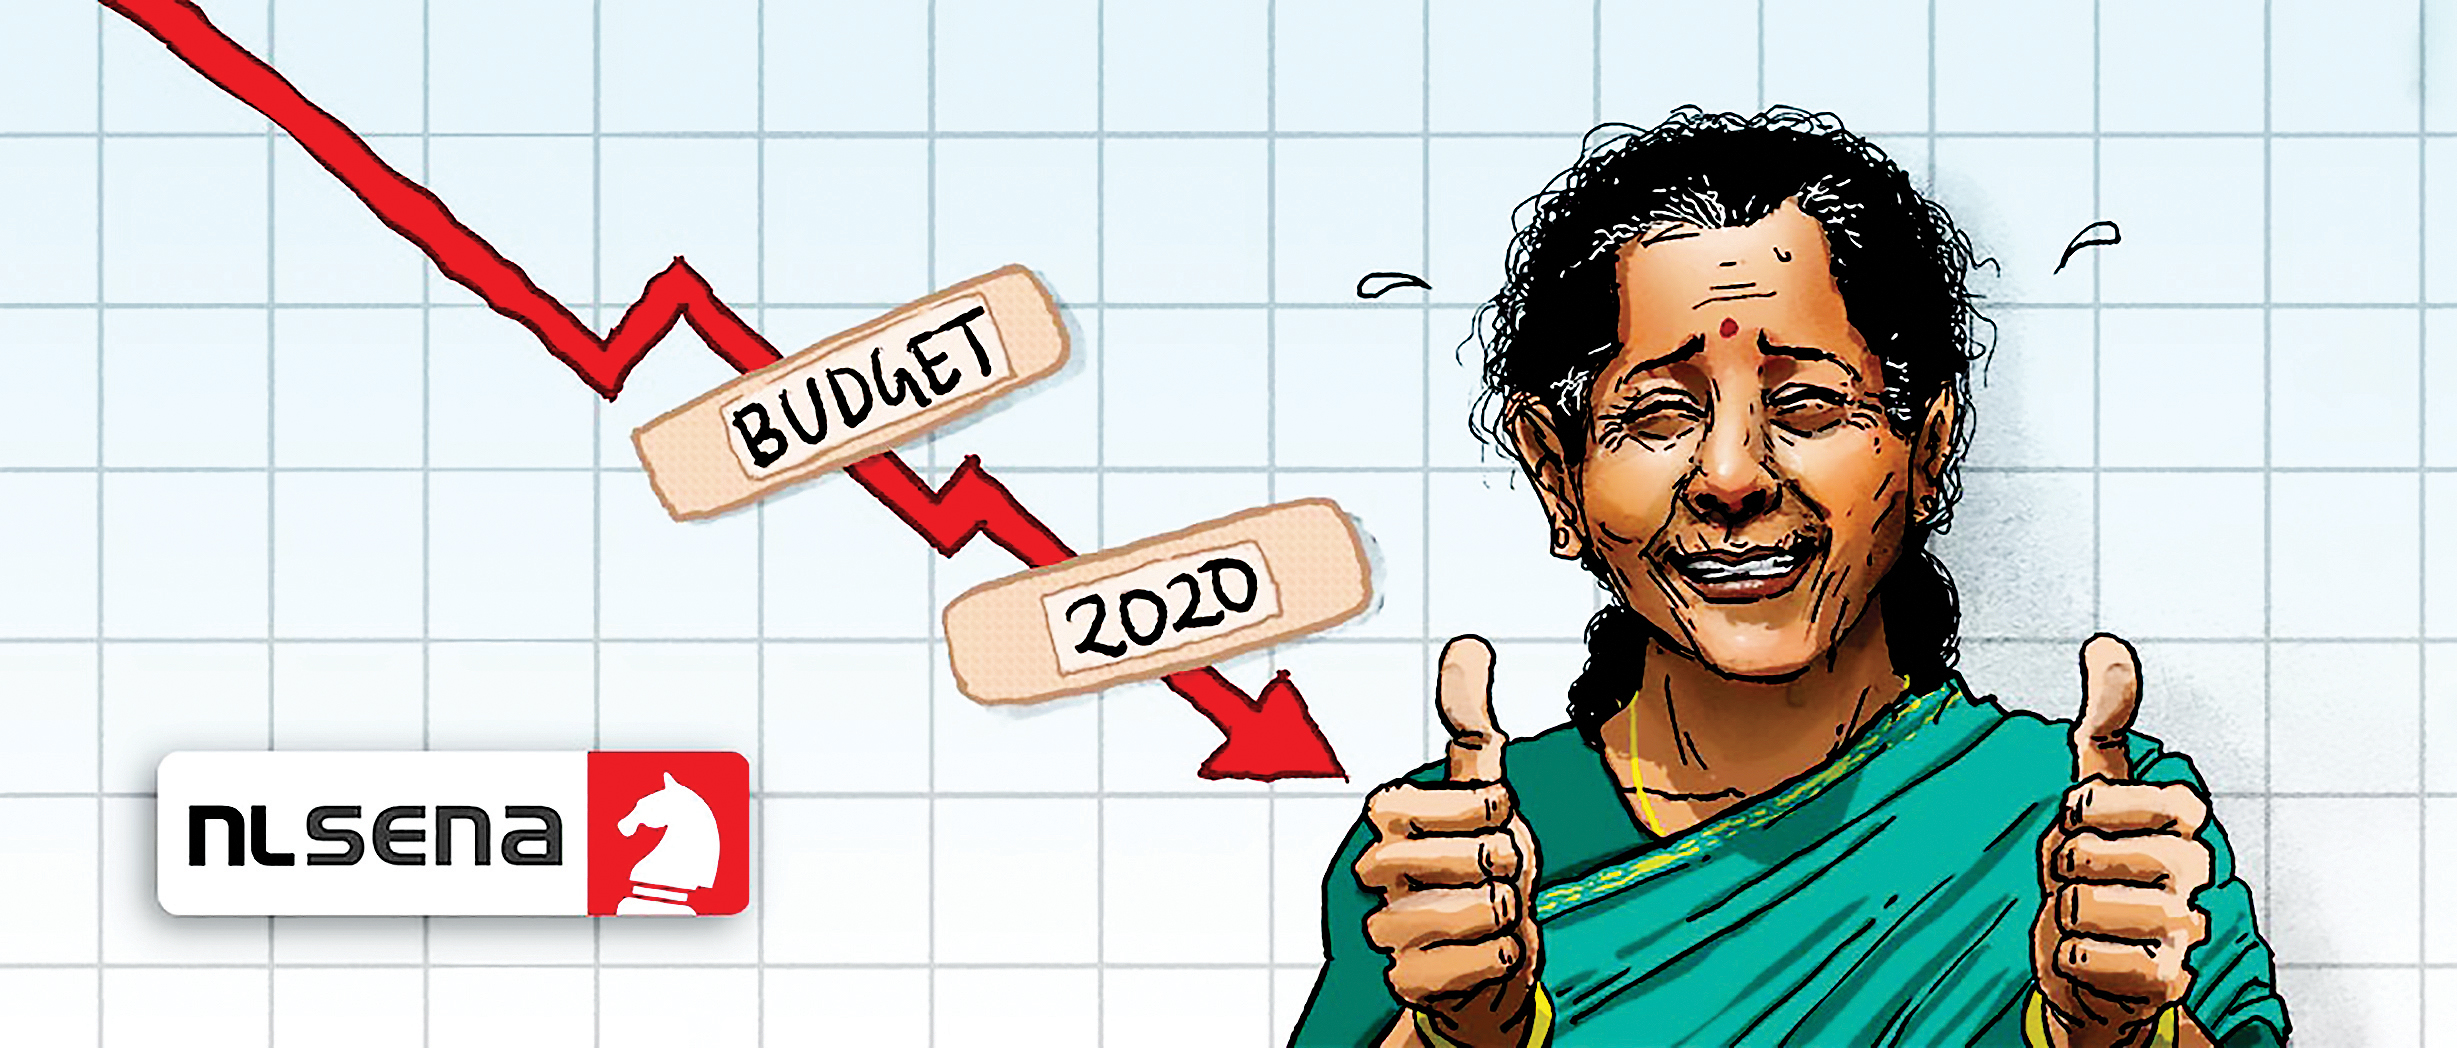 Can the Indian government spend its way out of the slowdown?